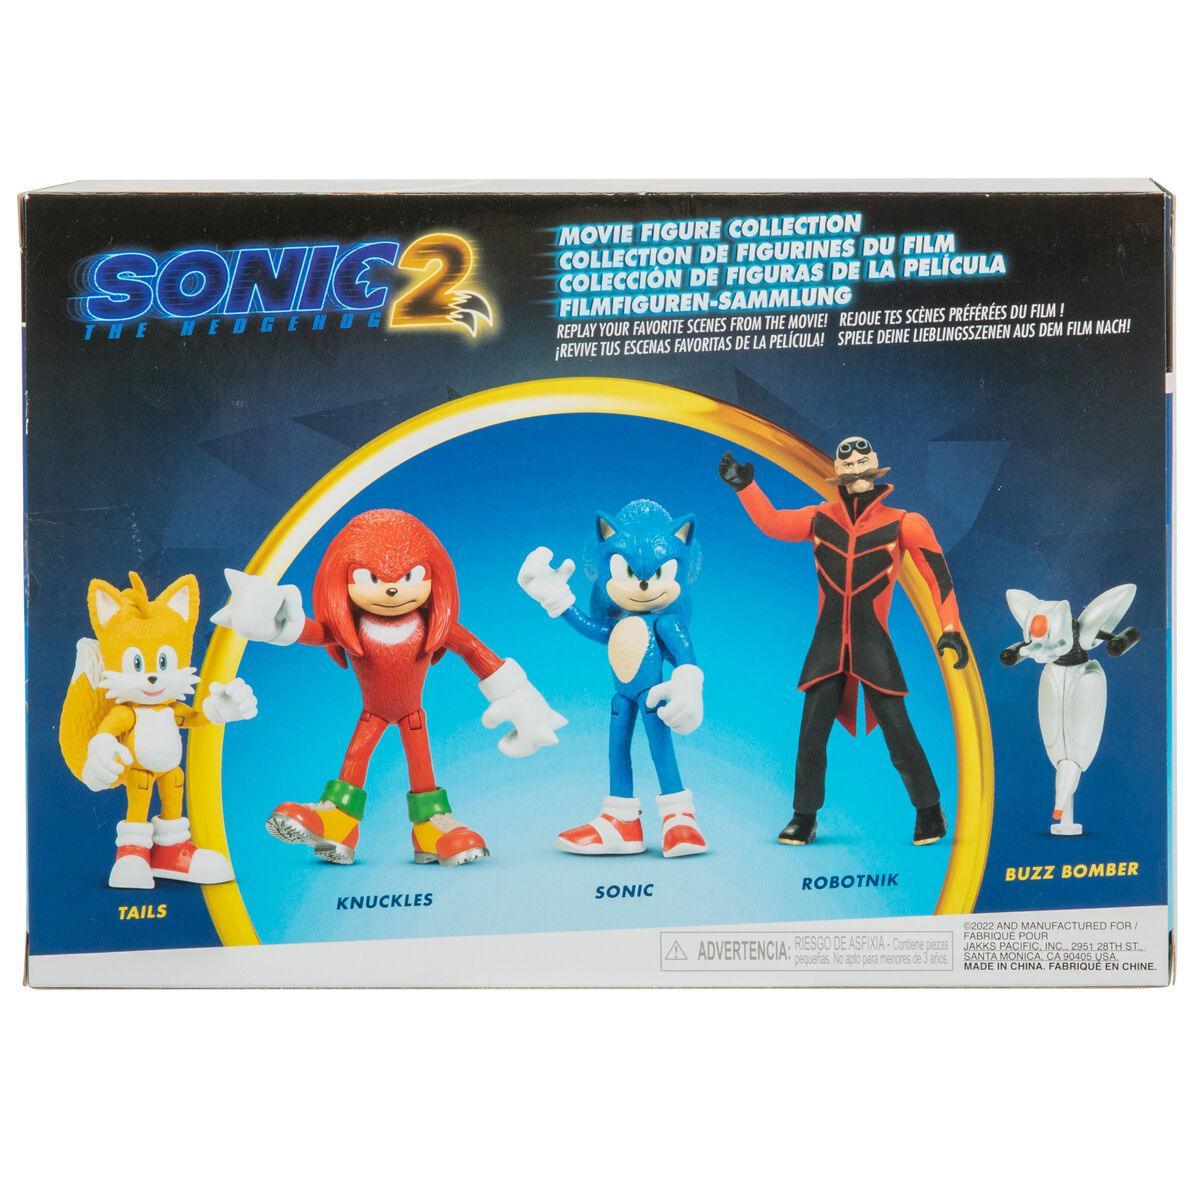 Sonic the Hedgehog 2 Movie 4-Inch Action Figures Wave 2 Case of 6